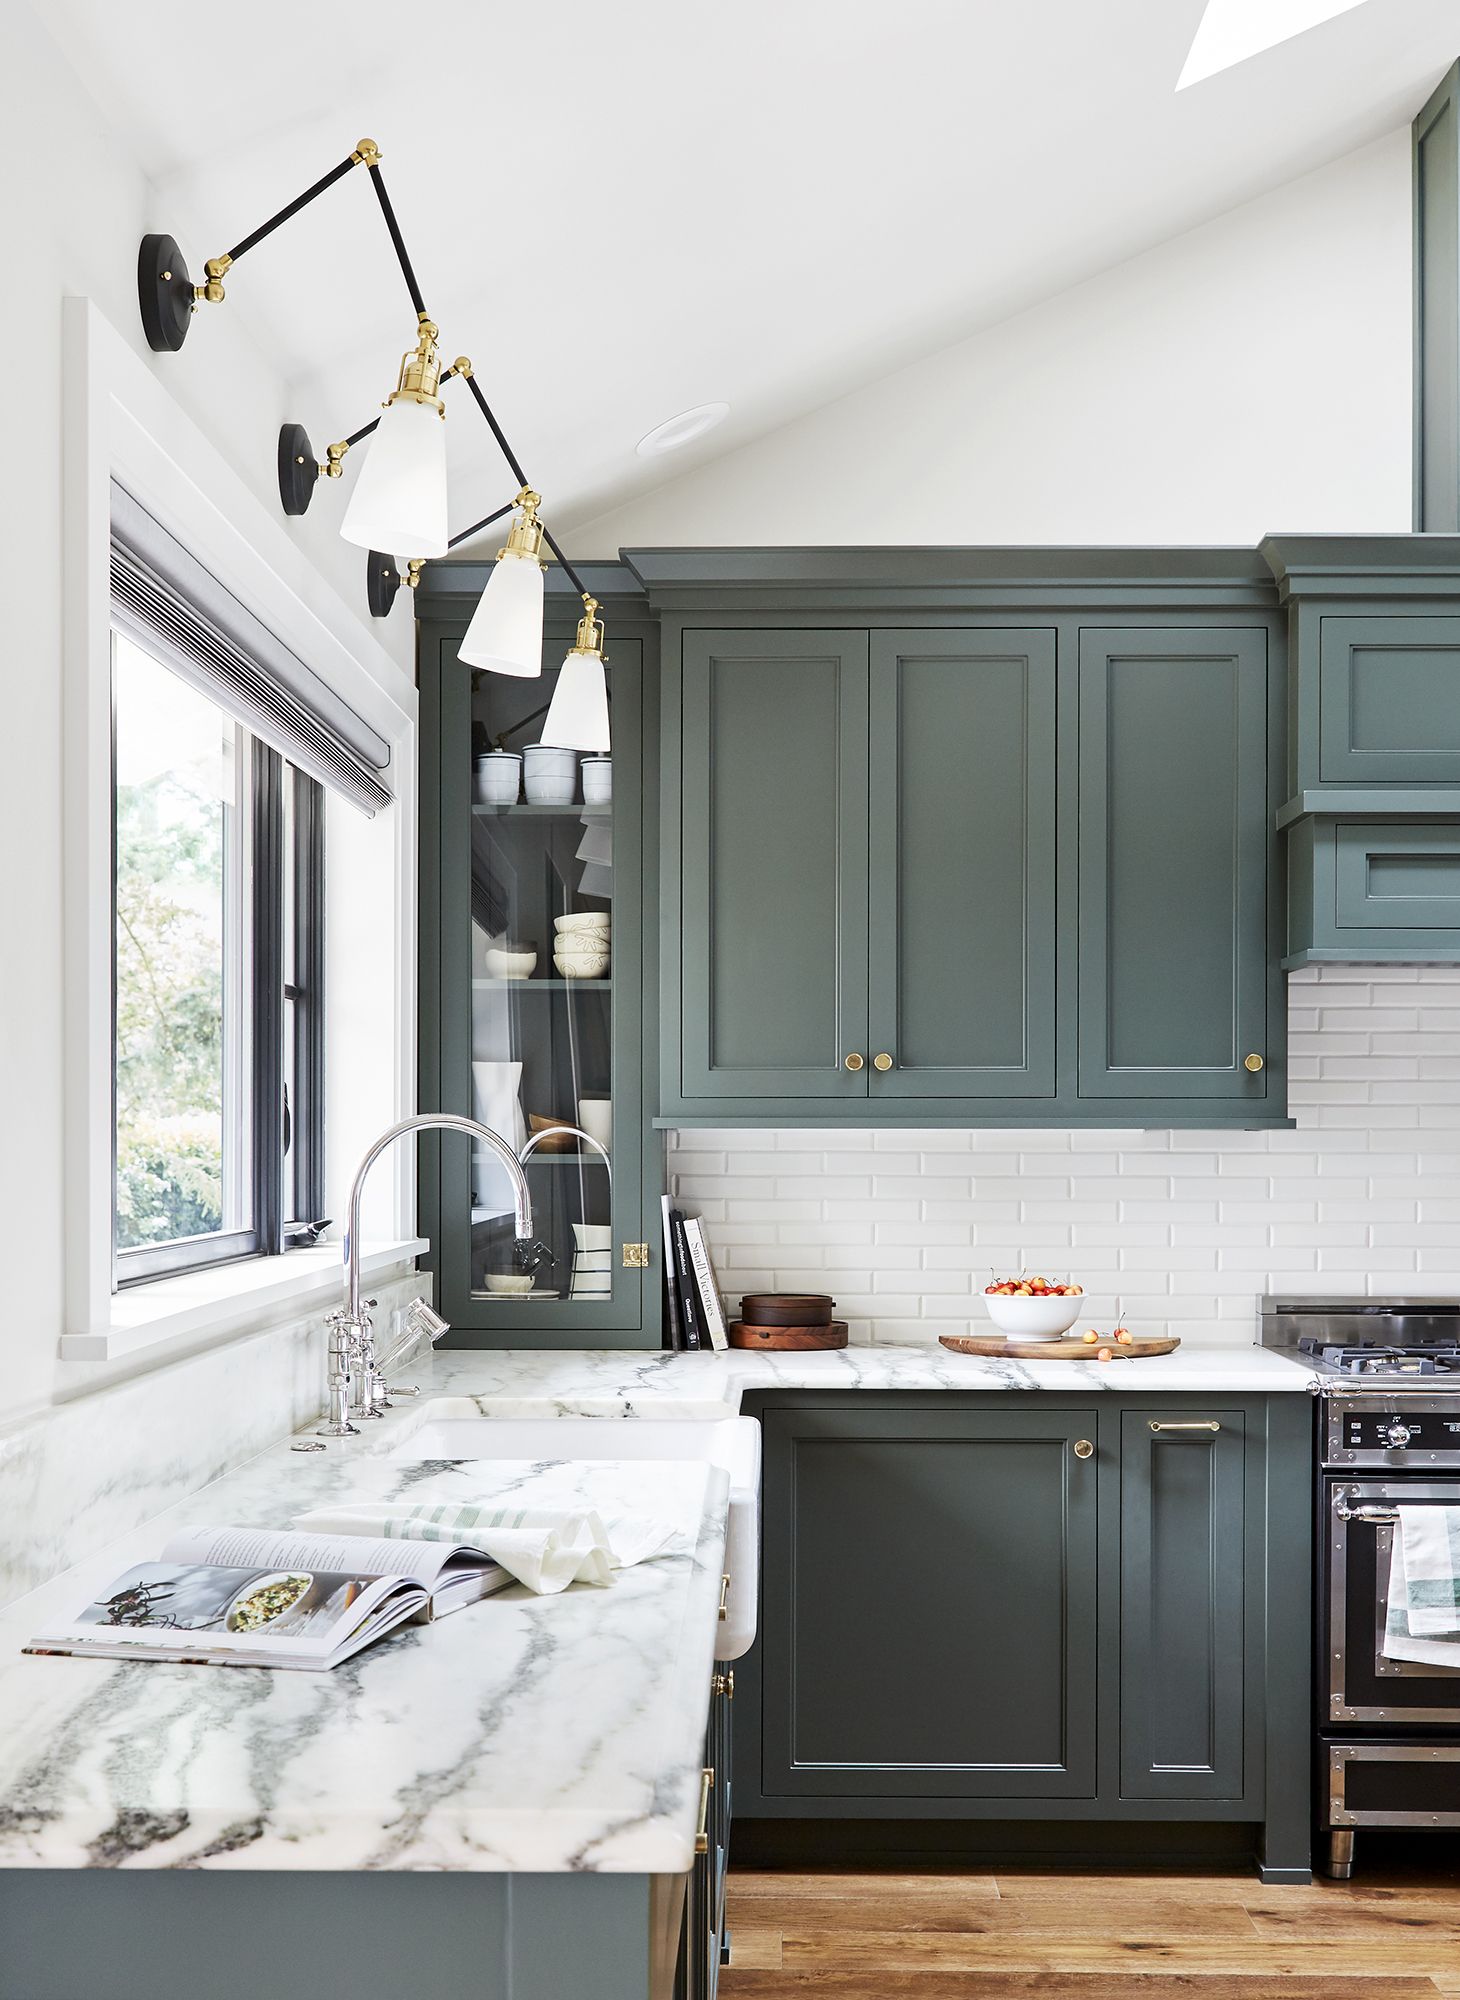 How To Paint Your Kitchen Cabinets, Should I Use Enamel Paint On Kitchen Cabinets